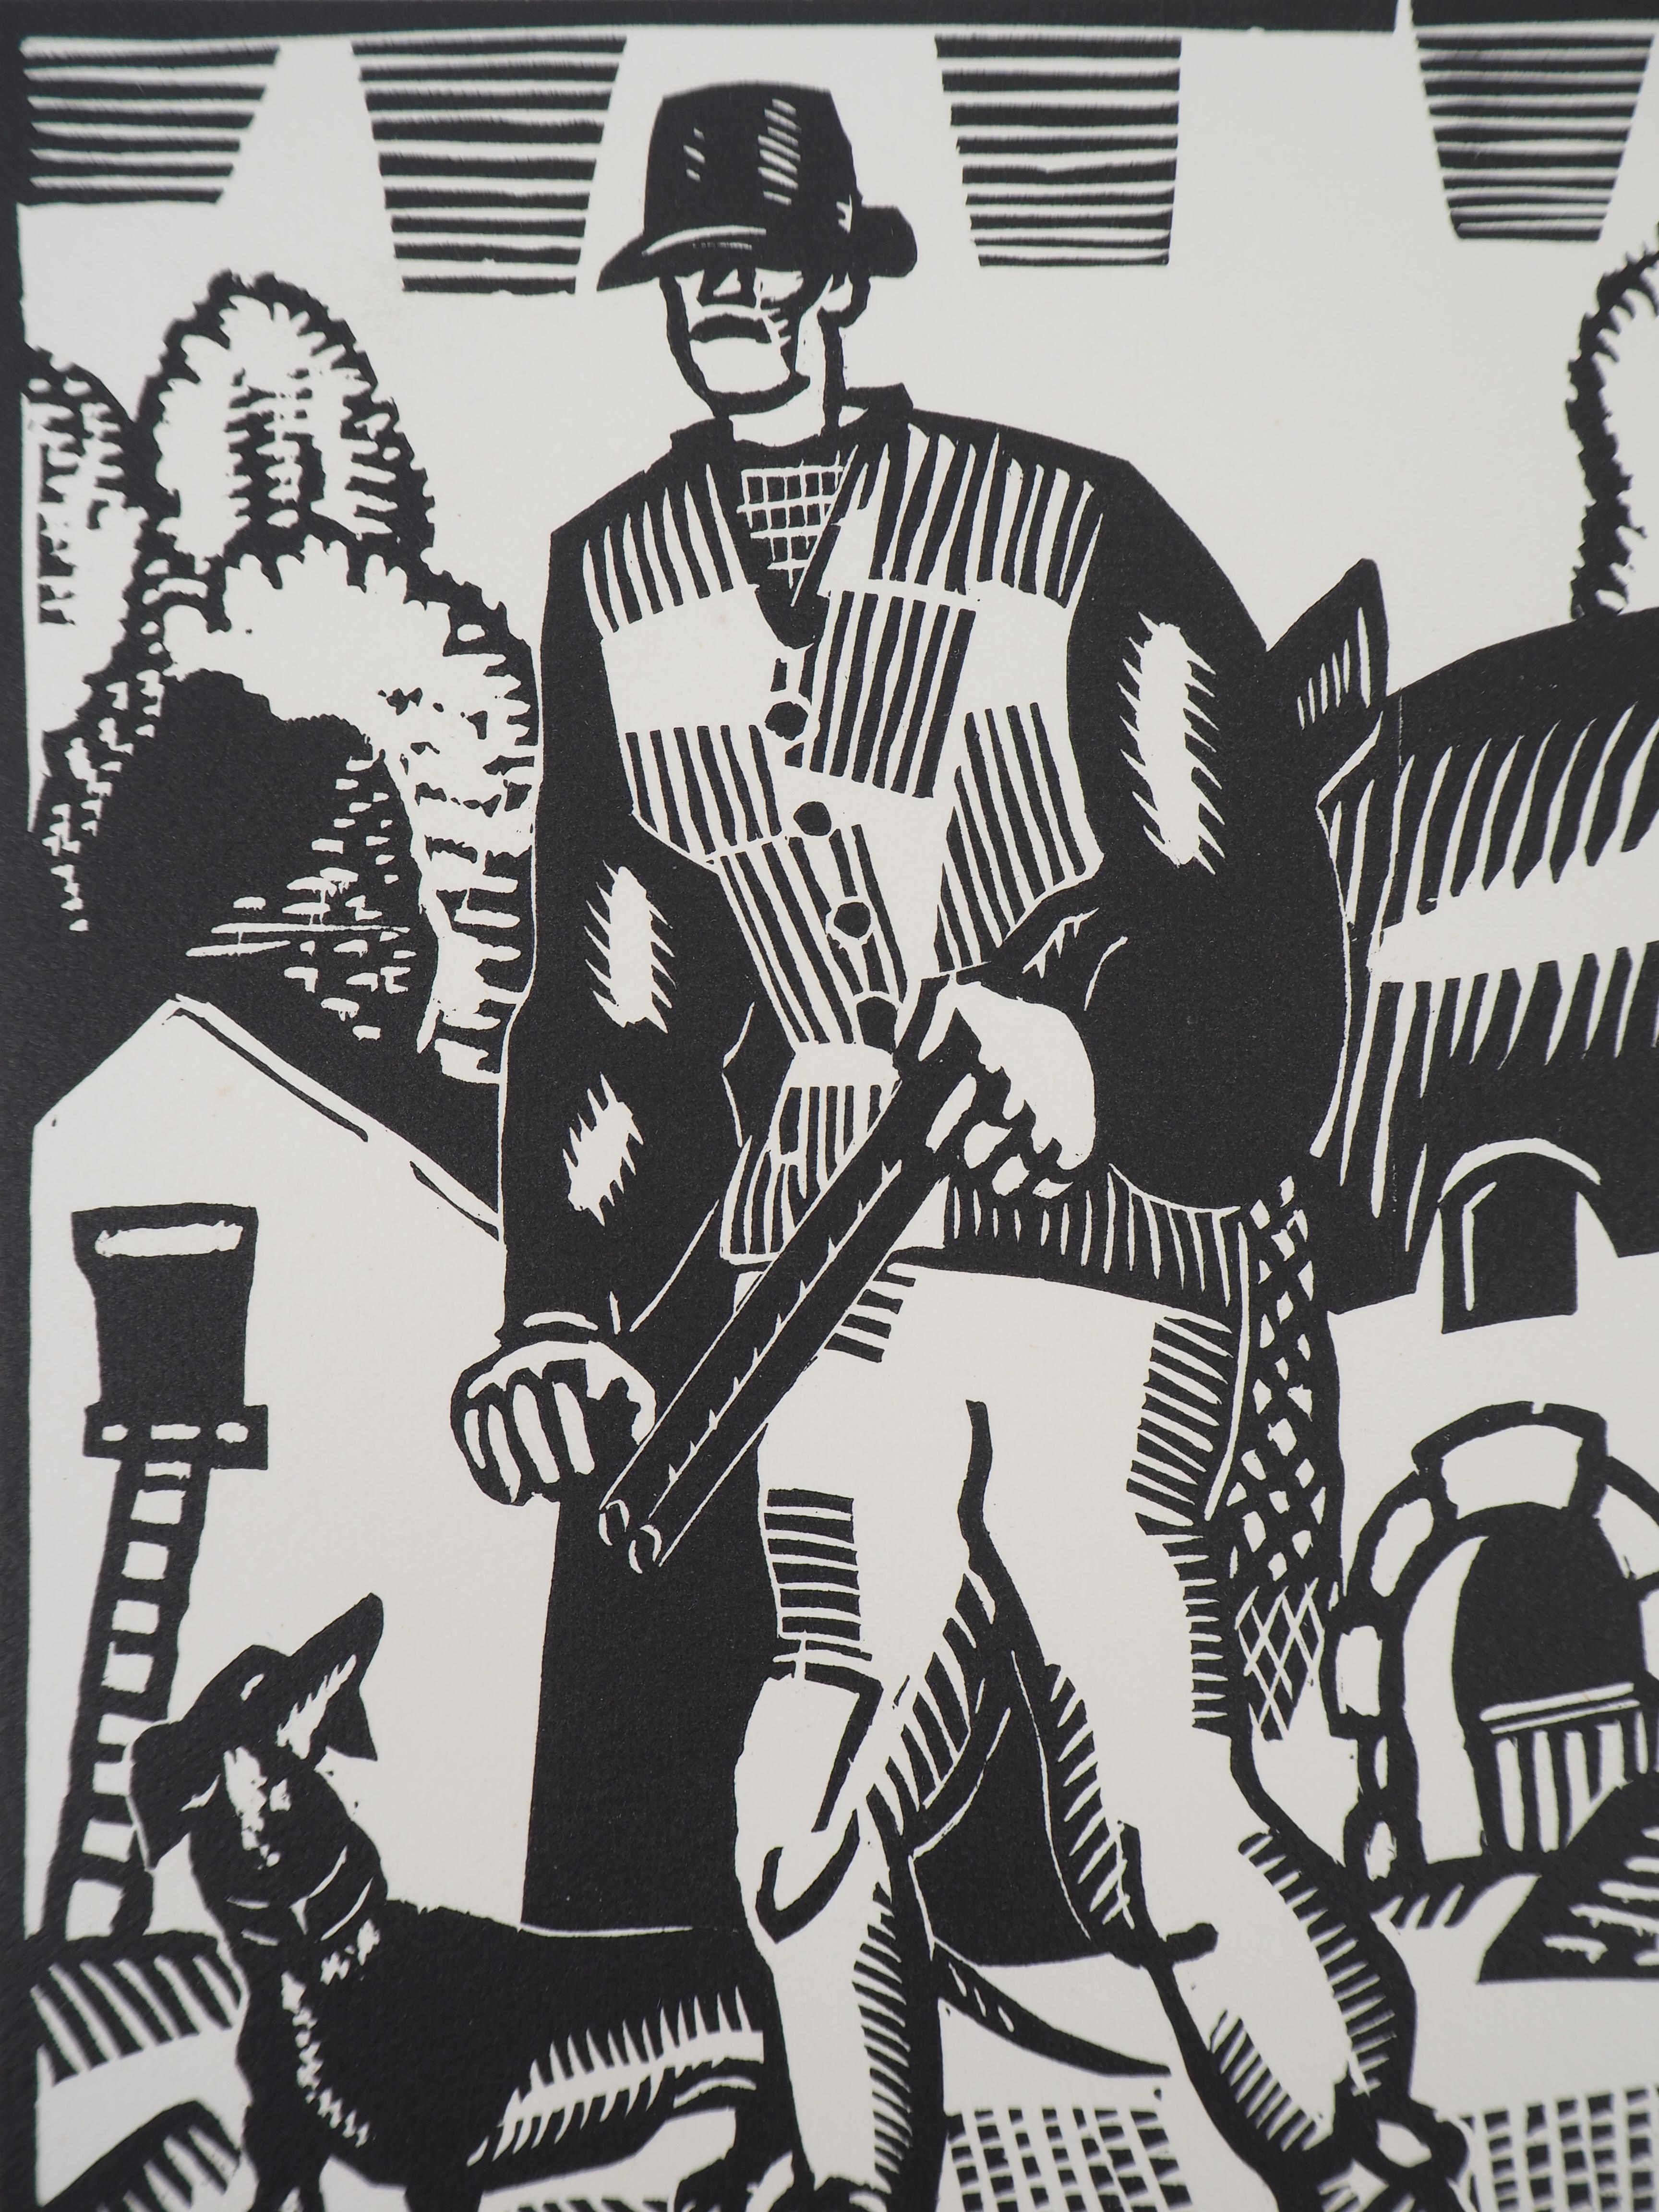 Rustical Hunter - Original woodcut, Handsigned and Numbered /160 - Ref #L747 - Modern Print by Jean-Emile Laboureur